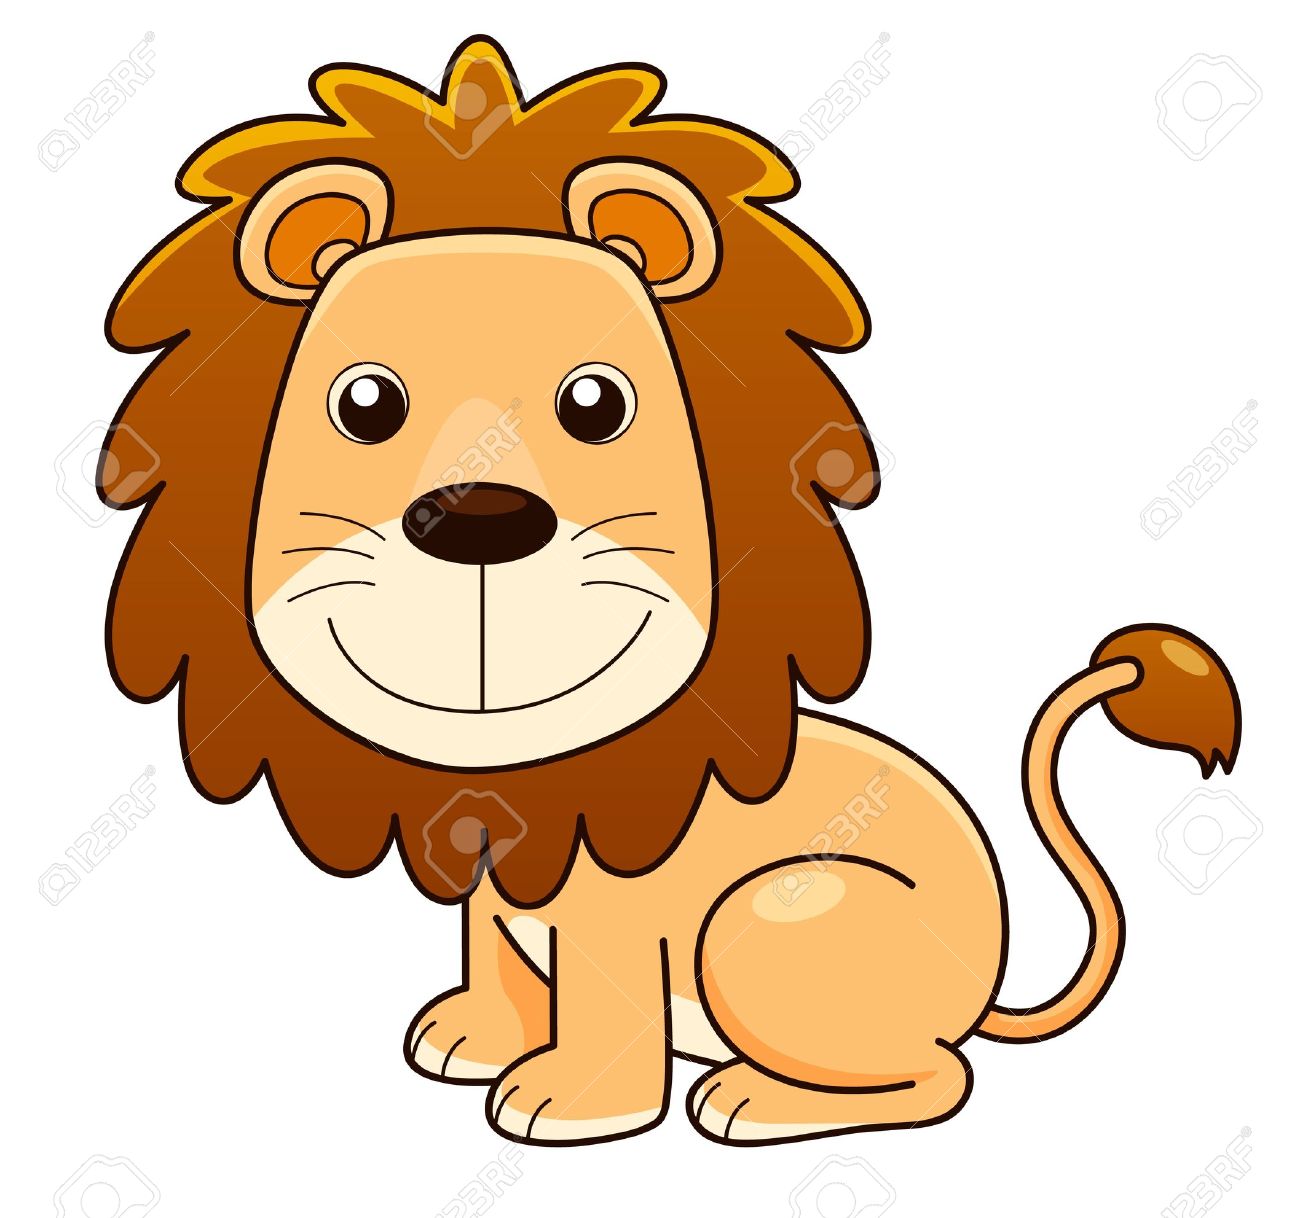 Animated Lions Pictures | Free download on ClipArtMag